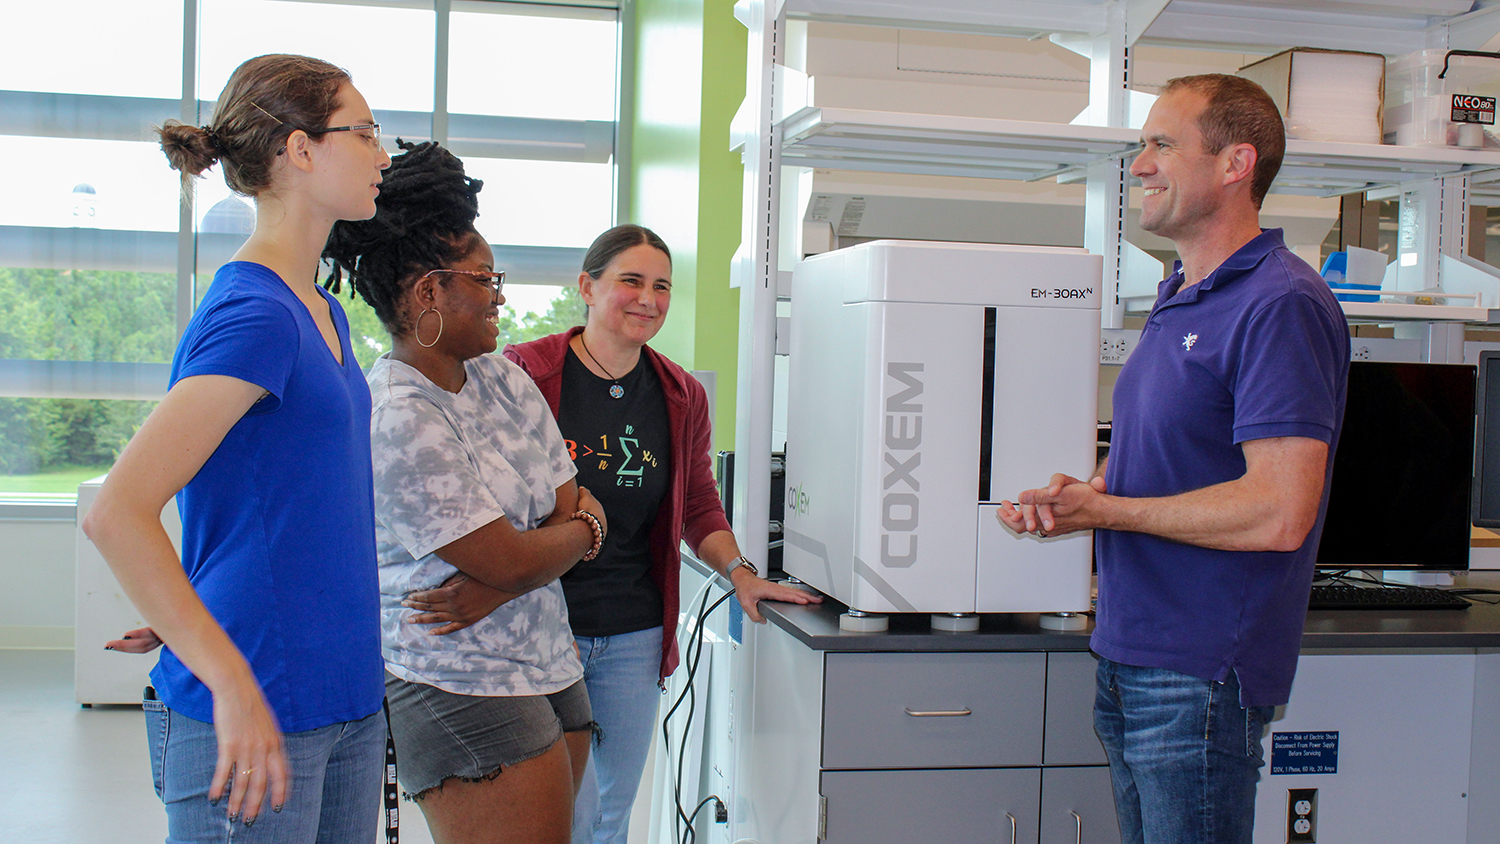 Dr. Jacob Jones, right, talks with three female students in the STEPS lab.